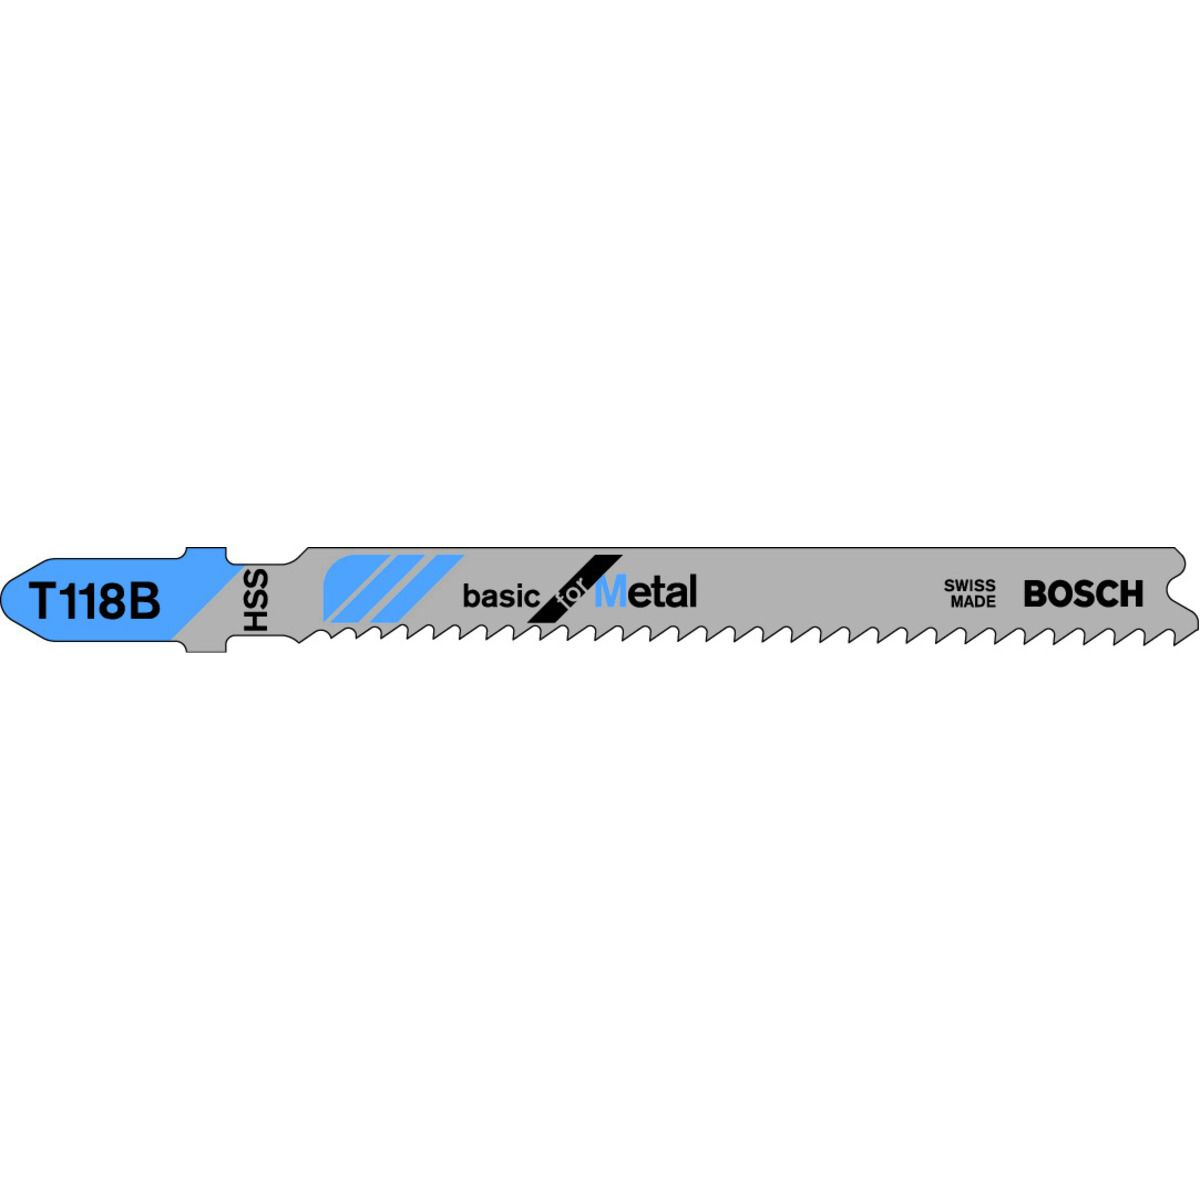 Image of Bosch T118B Metal Jigsaw Blades - Pack of 5